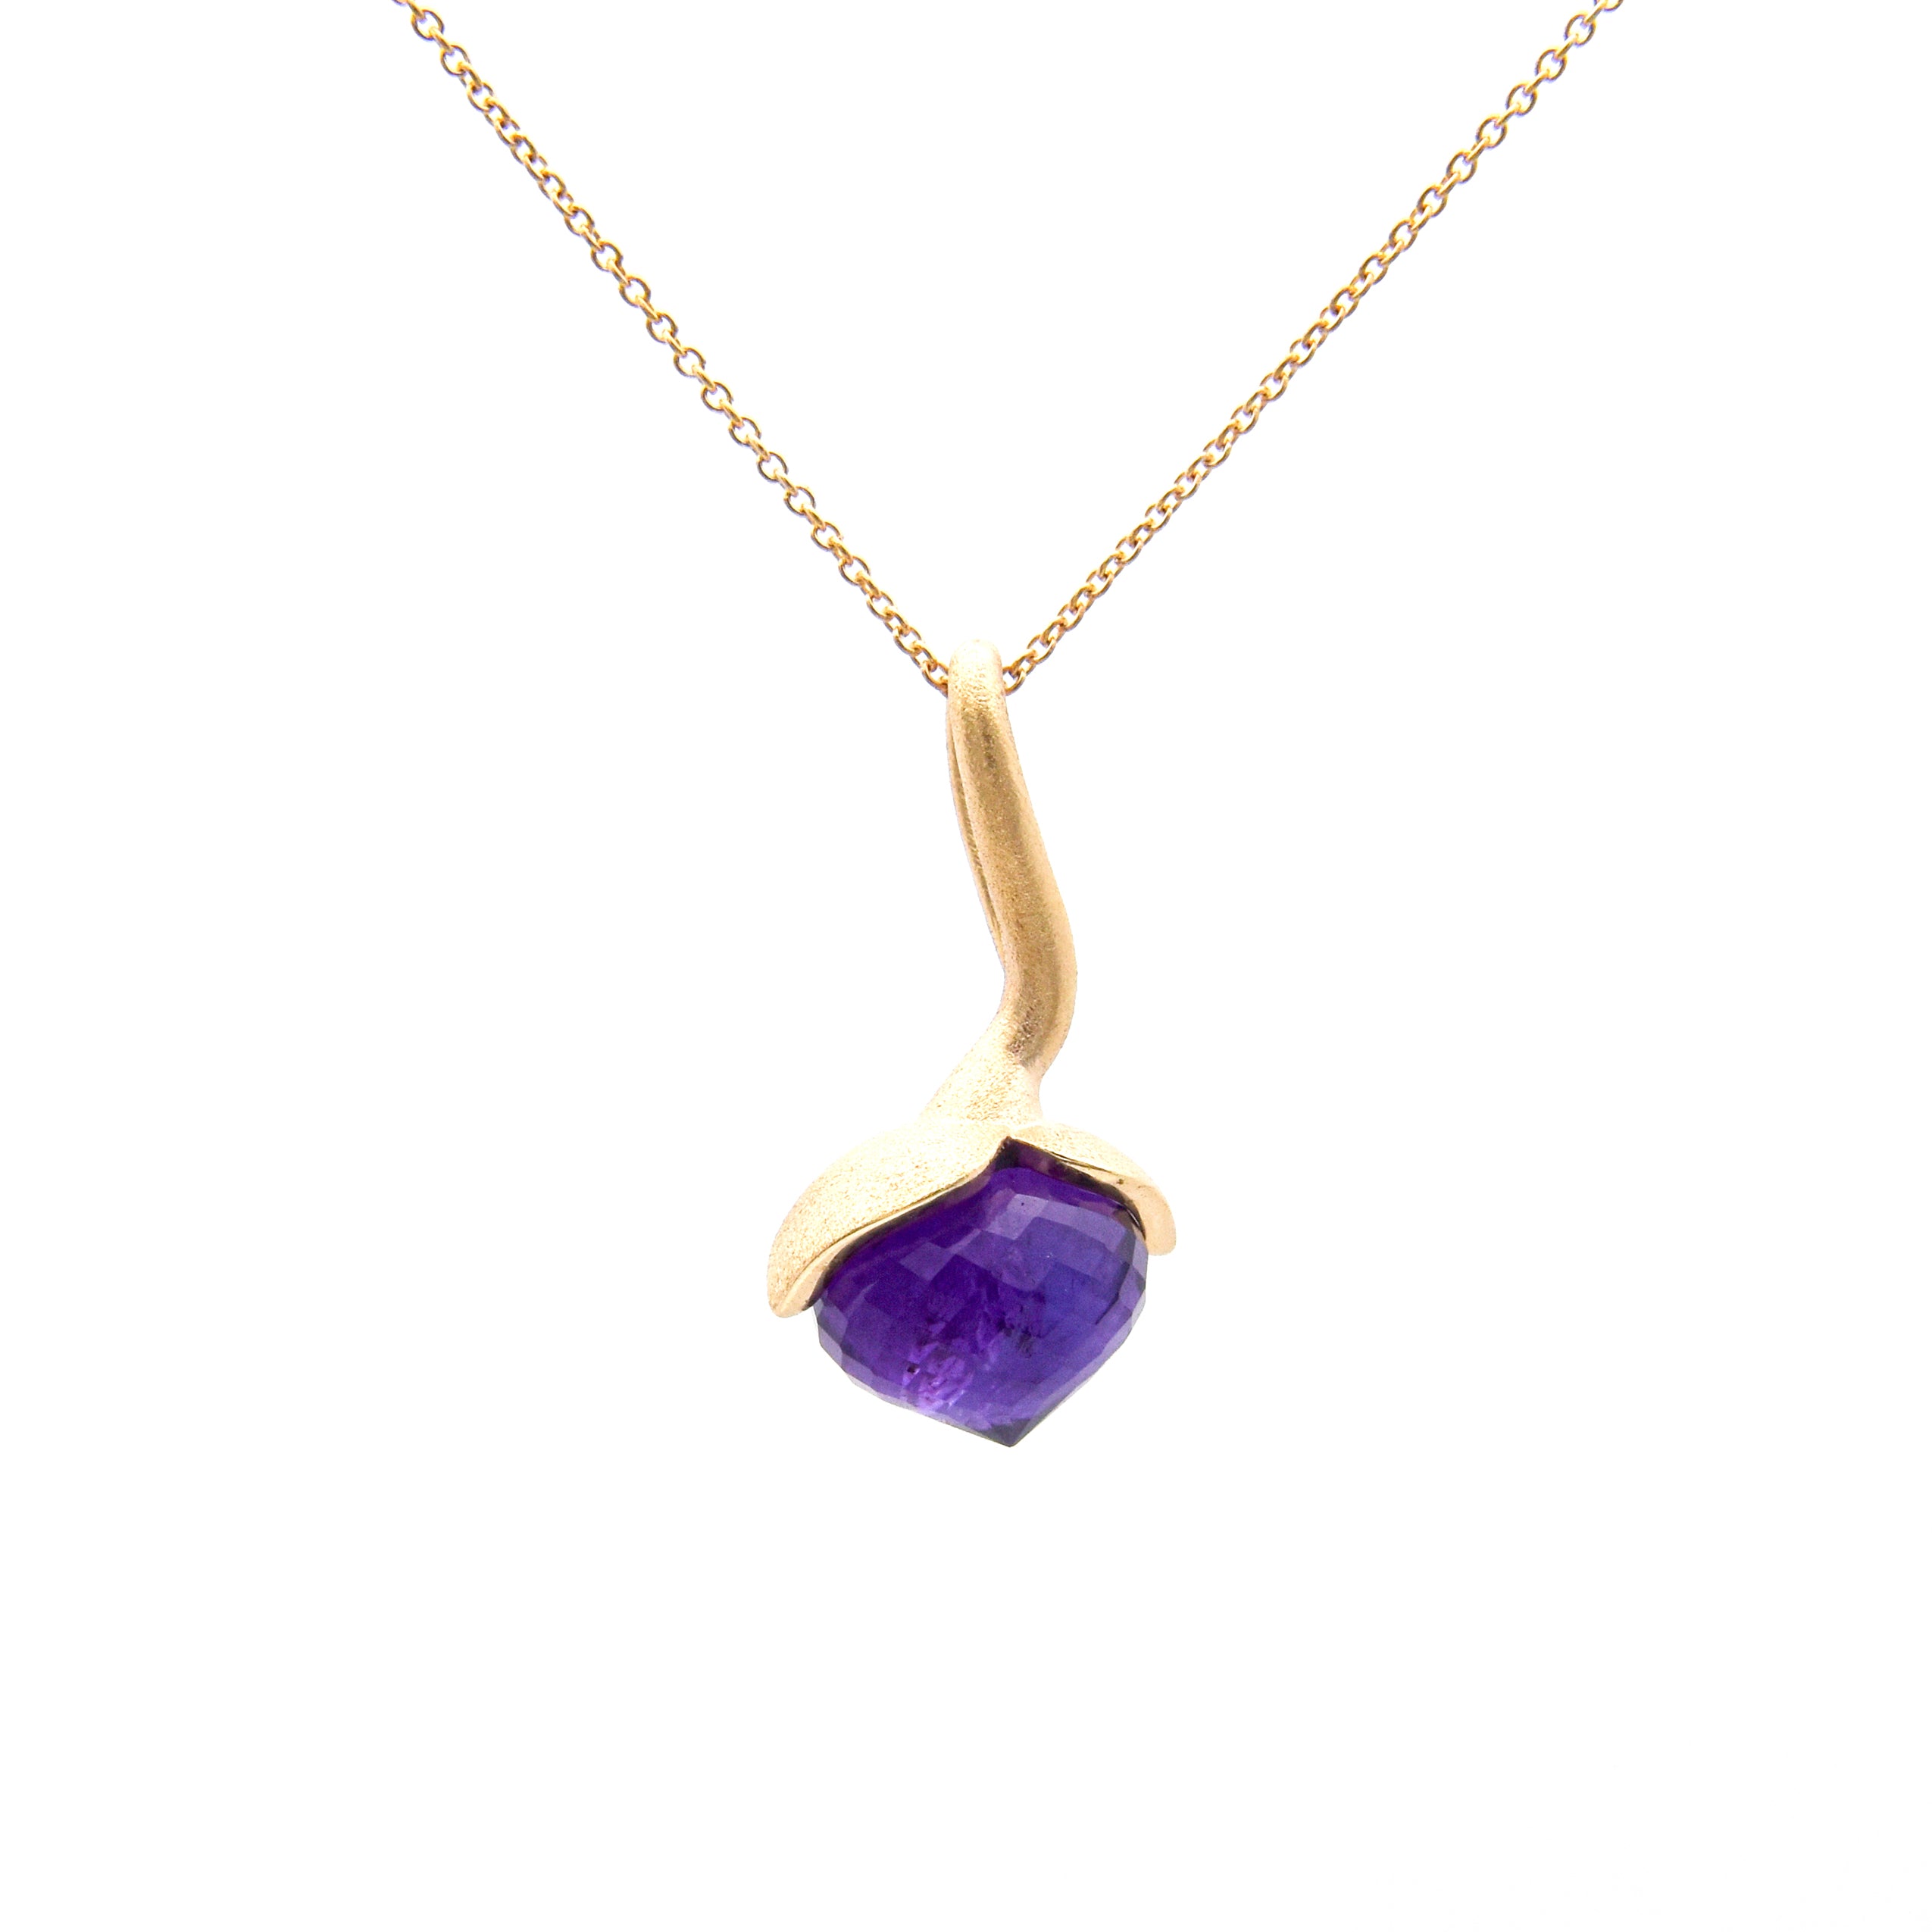 Dolce pendant "big" with amethyst 925/-